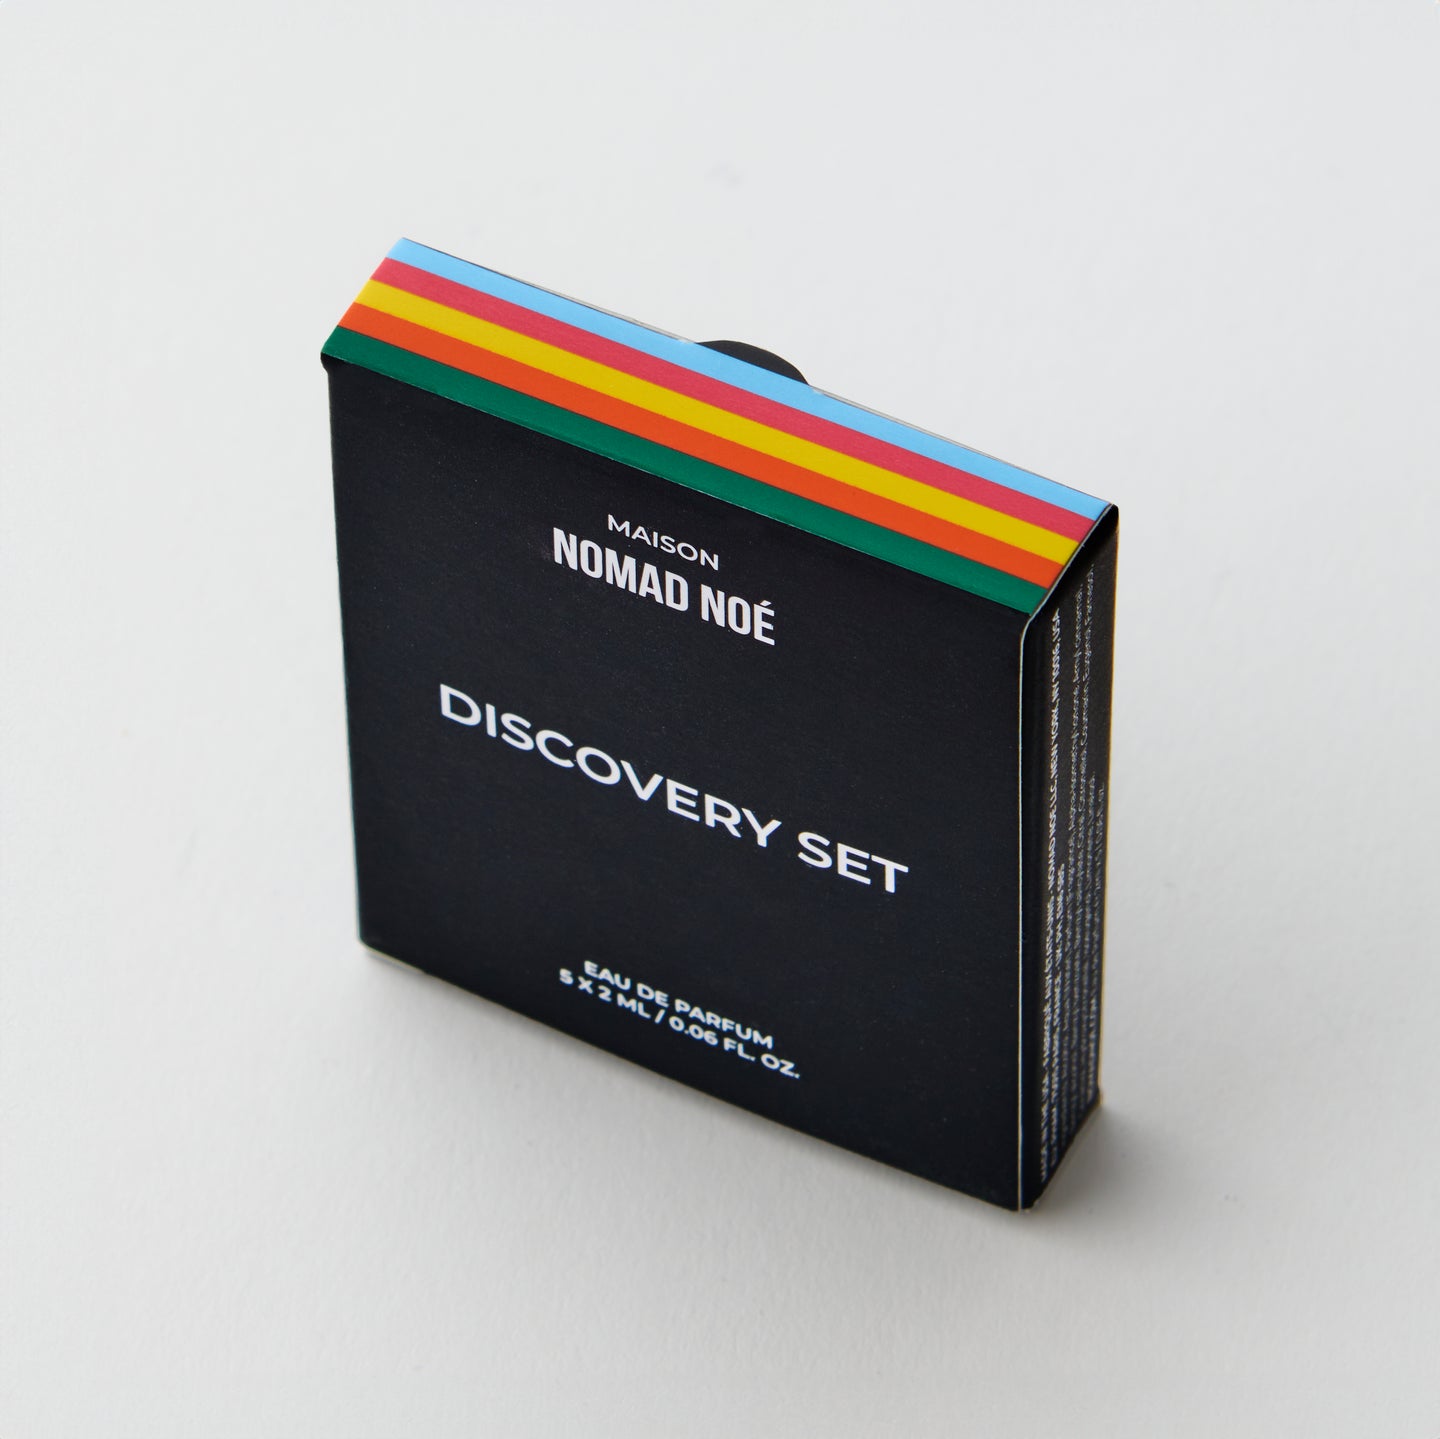 Perfume Discovery Set box by Maison Nomad Noé